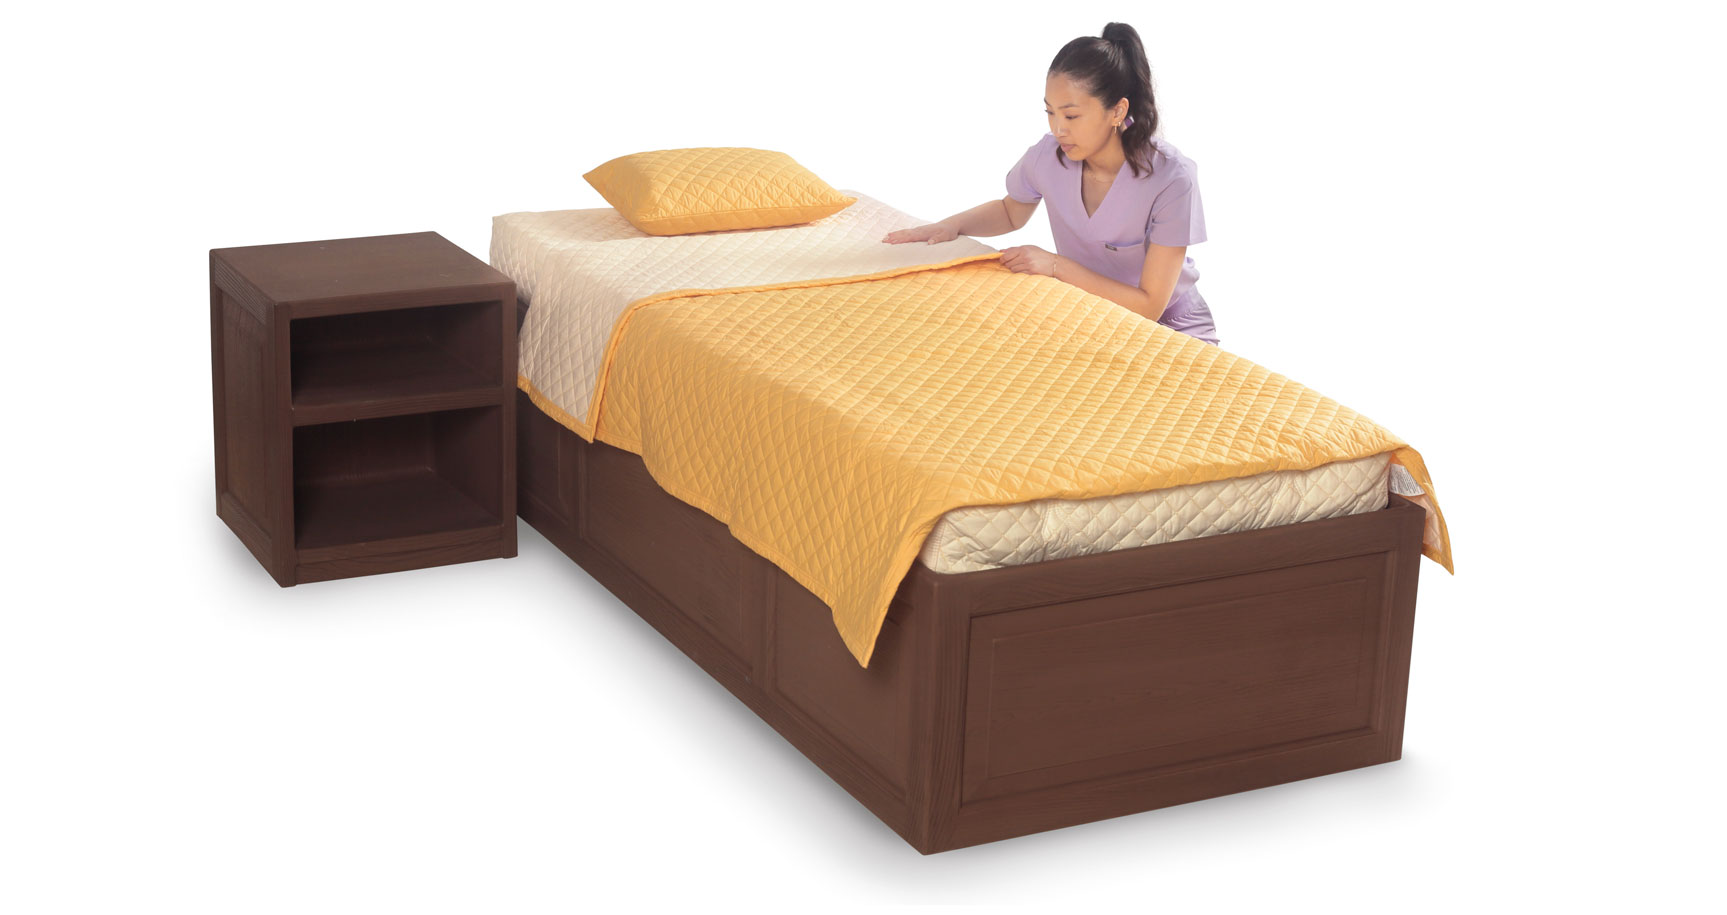 Girl making bed, featuring safety bedding in Corn Yellow color